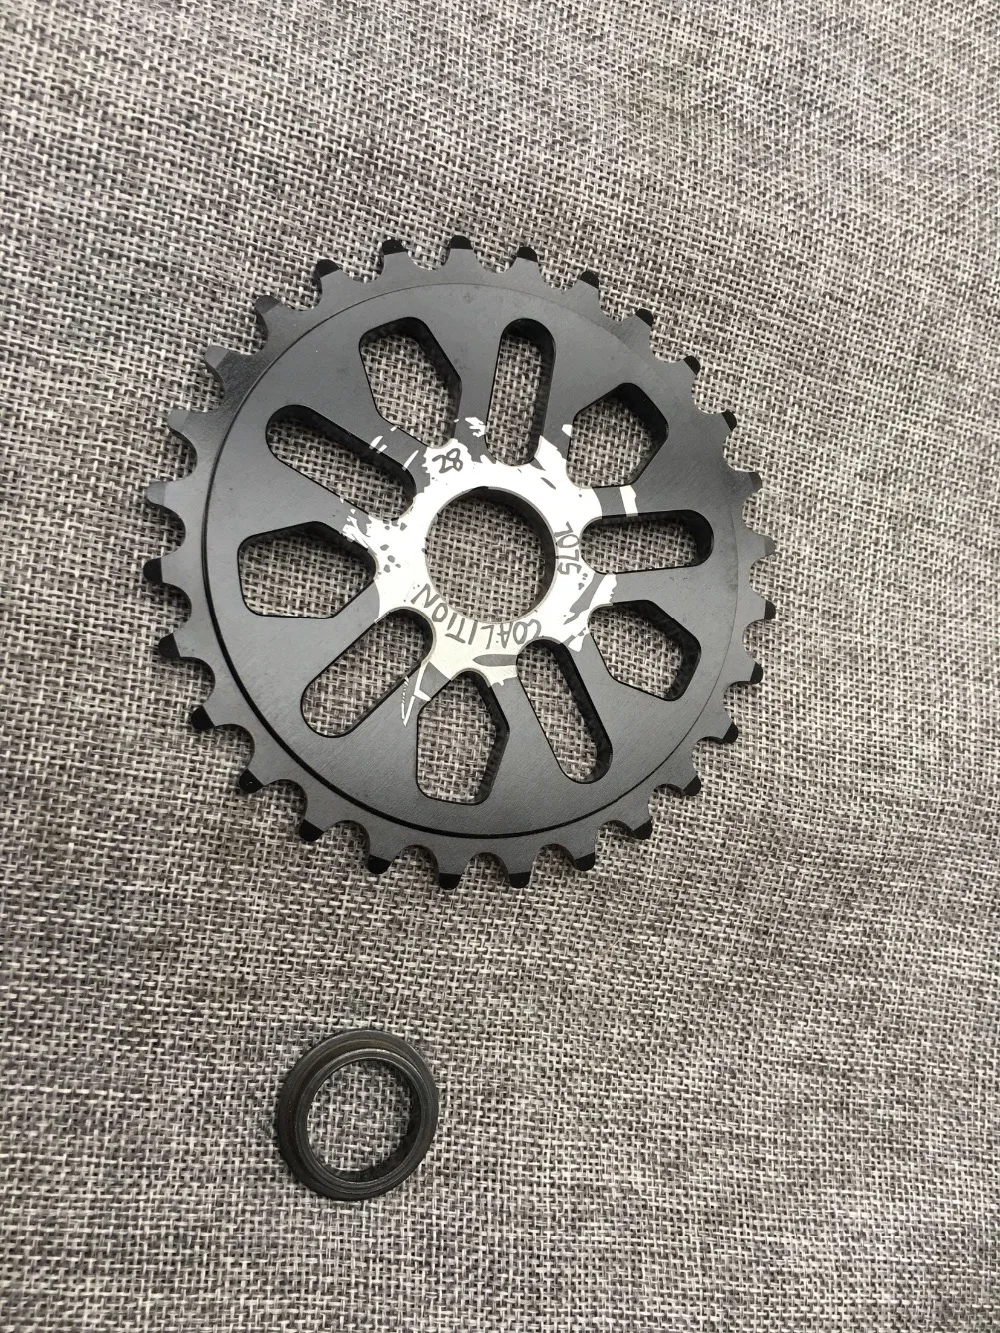 

Coalition bmx sprocket 28T full CNC 7075-T6 chainwheel bmx sprockets made in Taiwan a 19mm adapter included